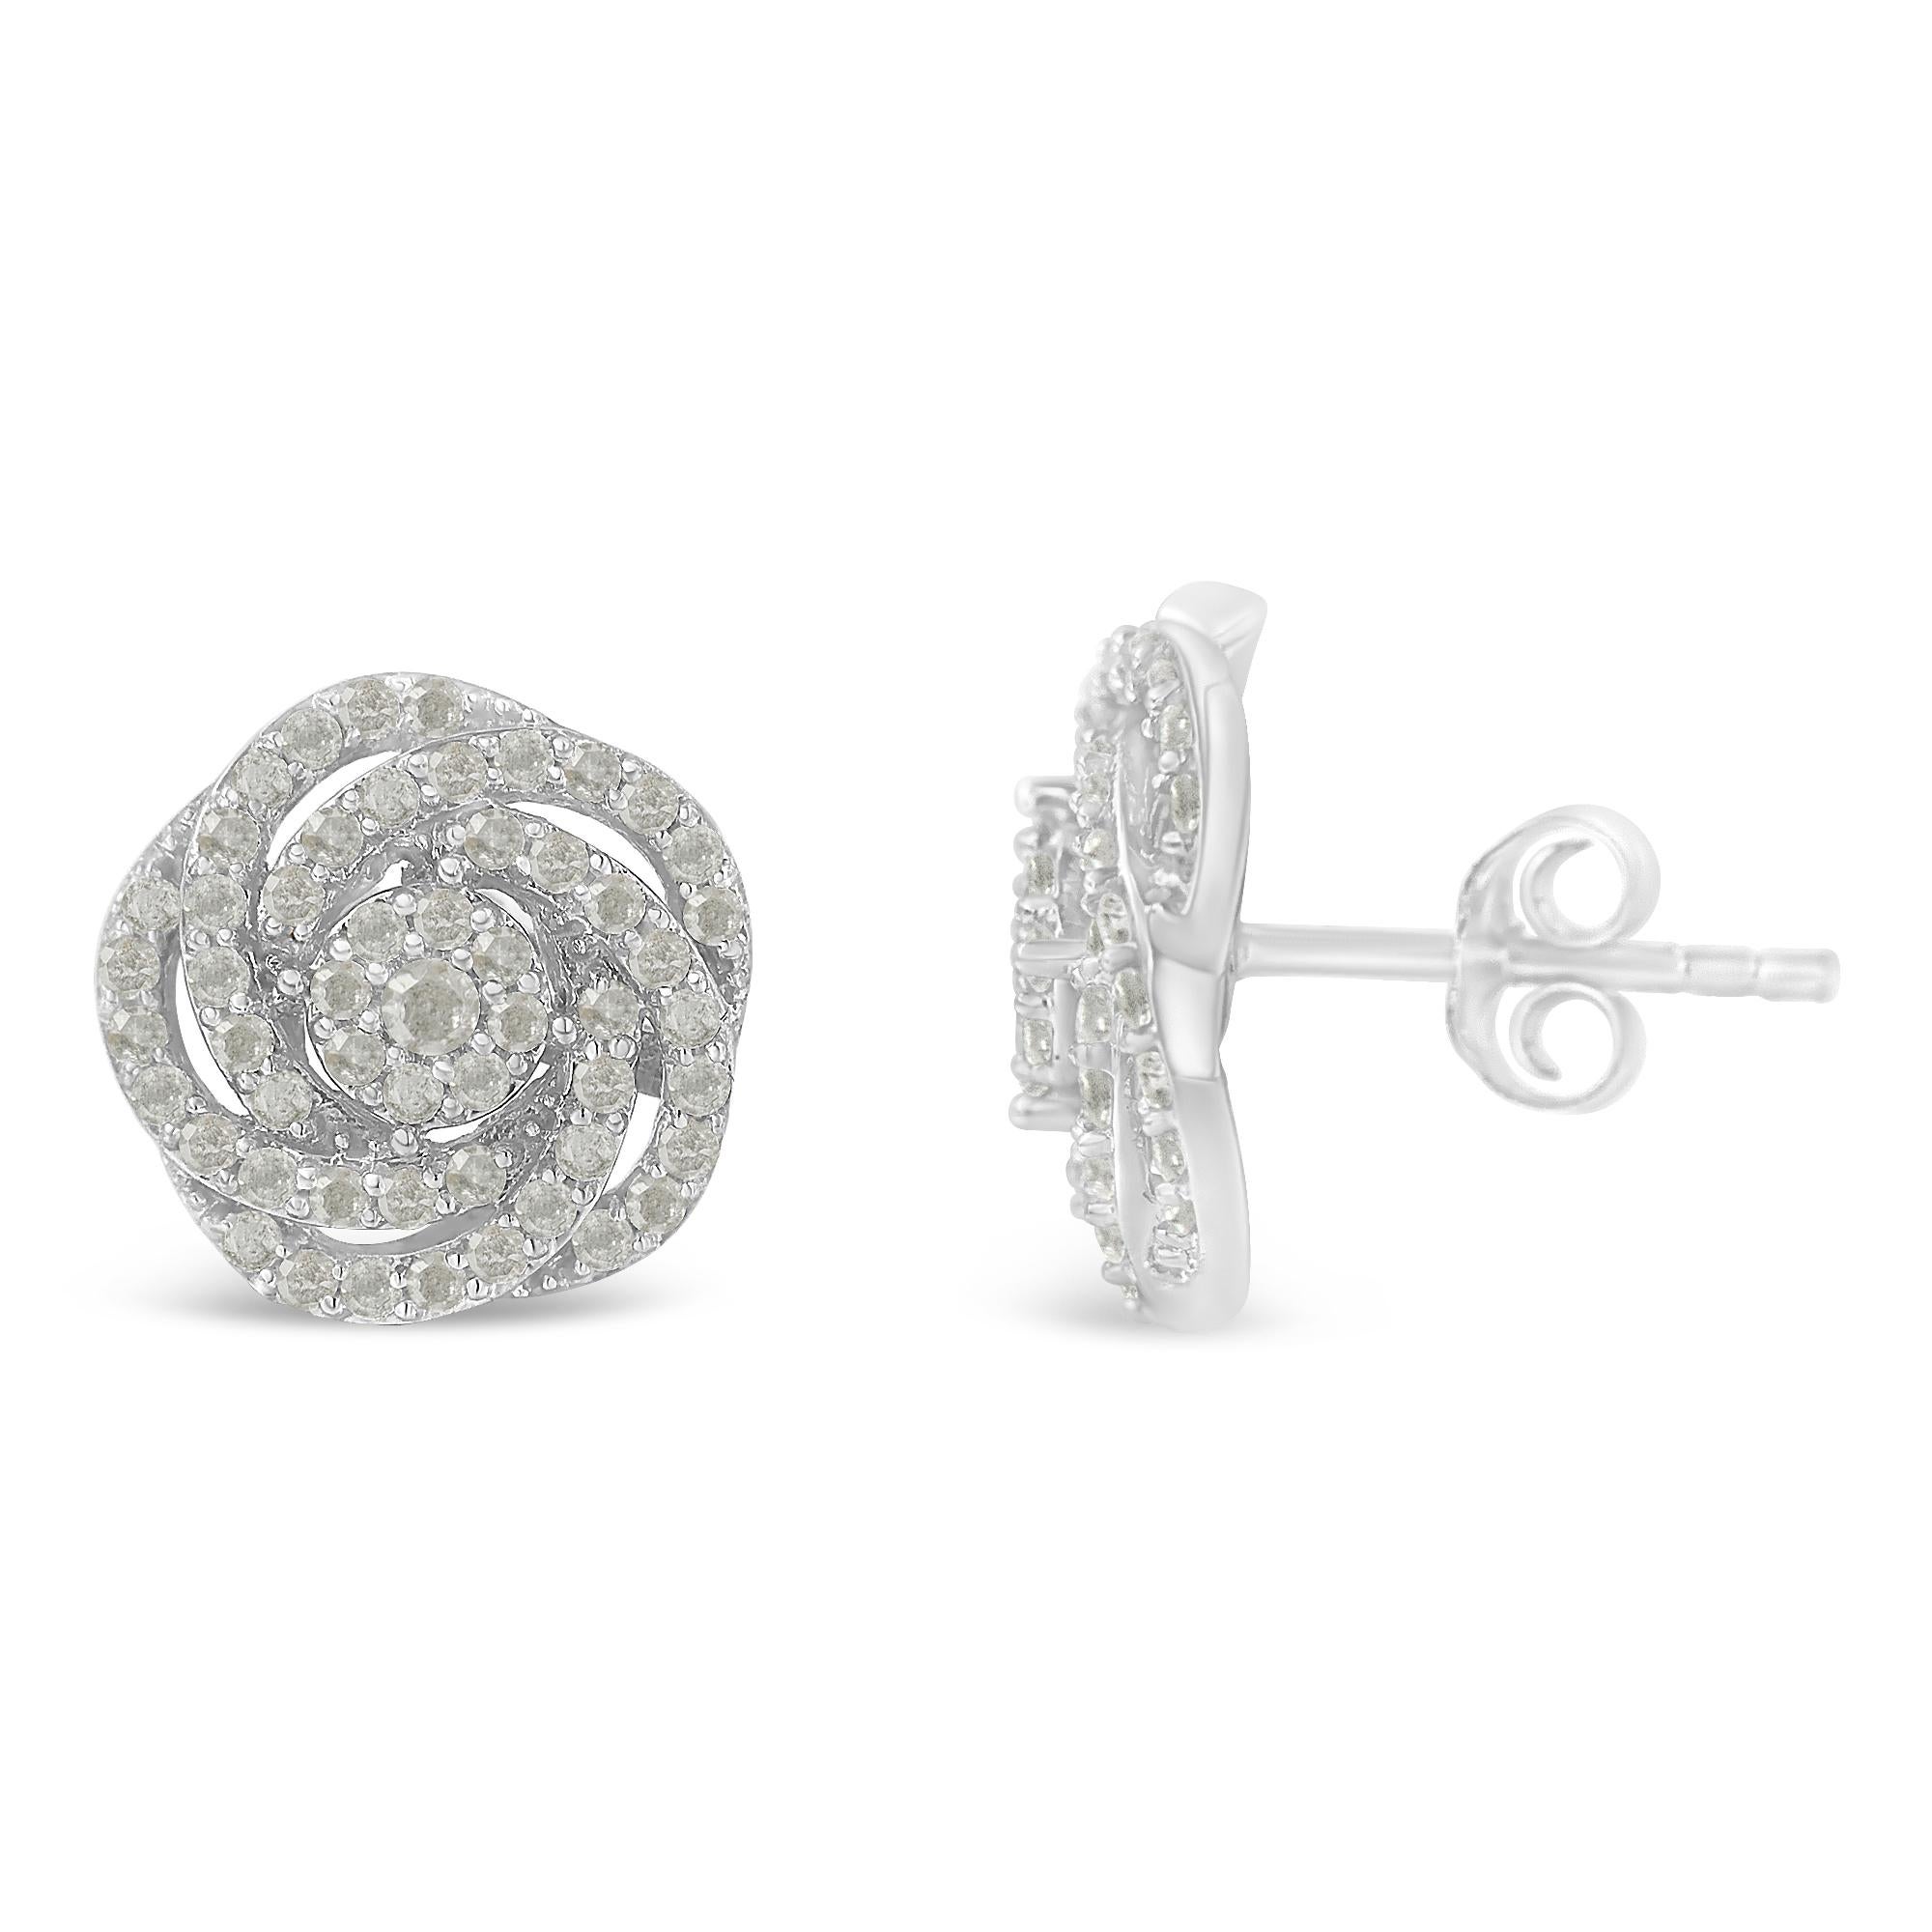 Delicate flower stud earring with a modern design that resembles a rose. The structure is made with 10k white gold and it features 108 round-cut genuine diamonds in a prong setting. The total diamond weight is 1/2ct. This fine jewelry piece is